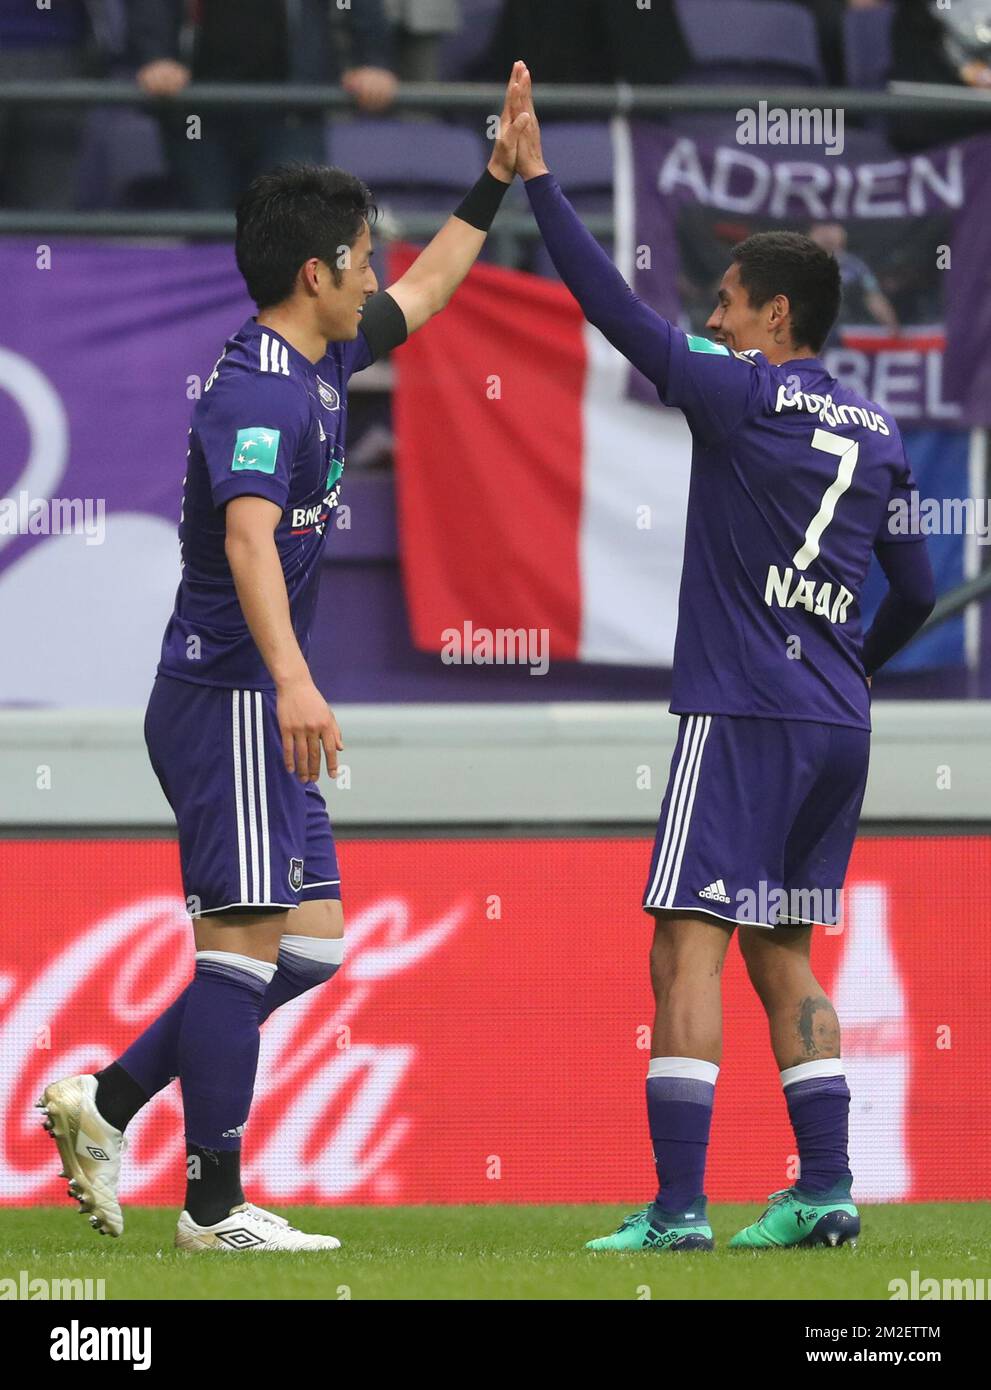 Anderlecht's Ryota Morioka and Anderlecht's Andy Najar celebrate after scoring during the Jupiler Pro League match between RSC Anderlecht and Sporting Charleroi, in Brussels, Sunday 29 April 2018, on day six of the Play-Off 1 of the Belgian soccer championship. BELGA PHOTO VIRGINIE LEFOUR Stock Photo